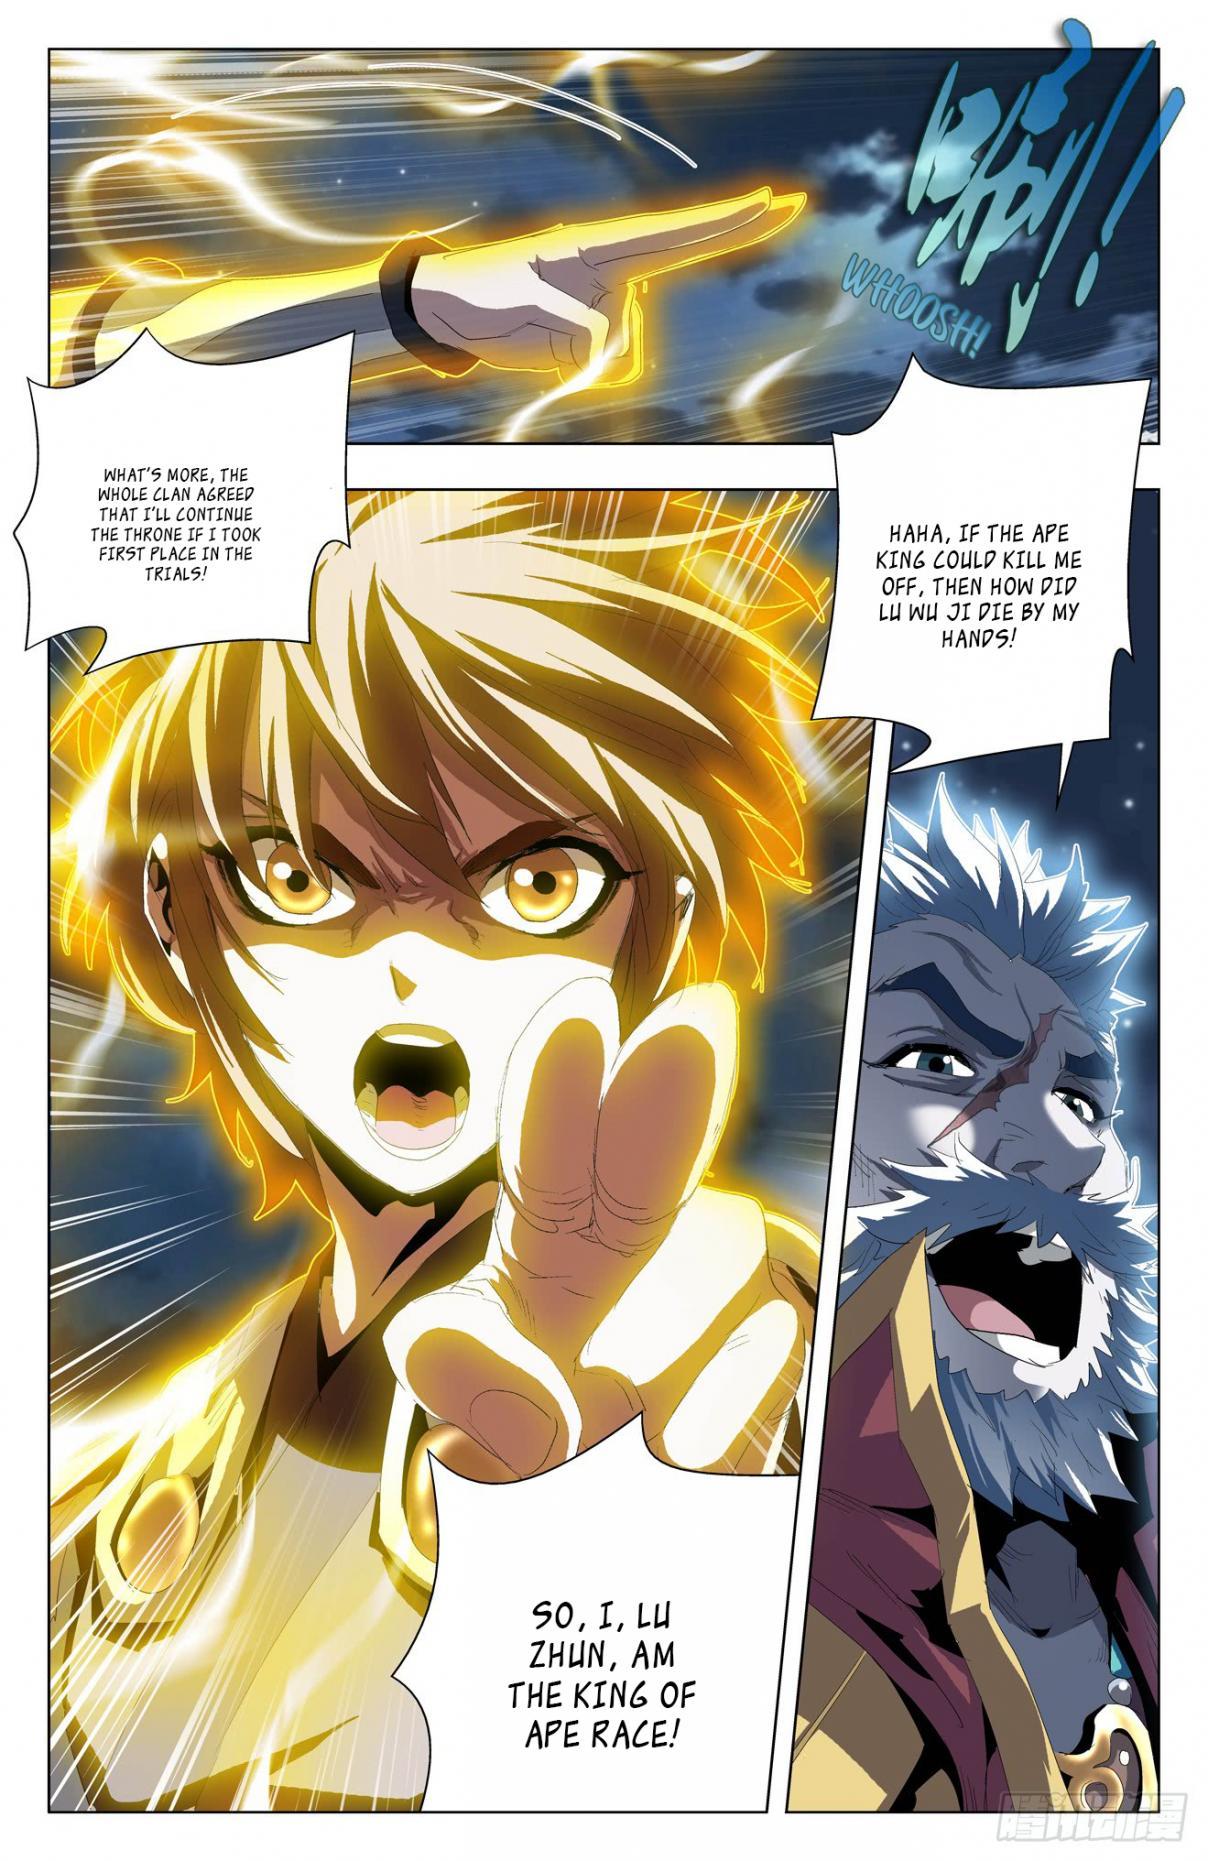 Fights Break Sphere – Return of the Beasts Ch. 47 I'm the King